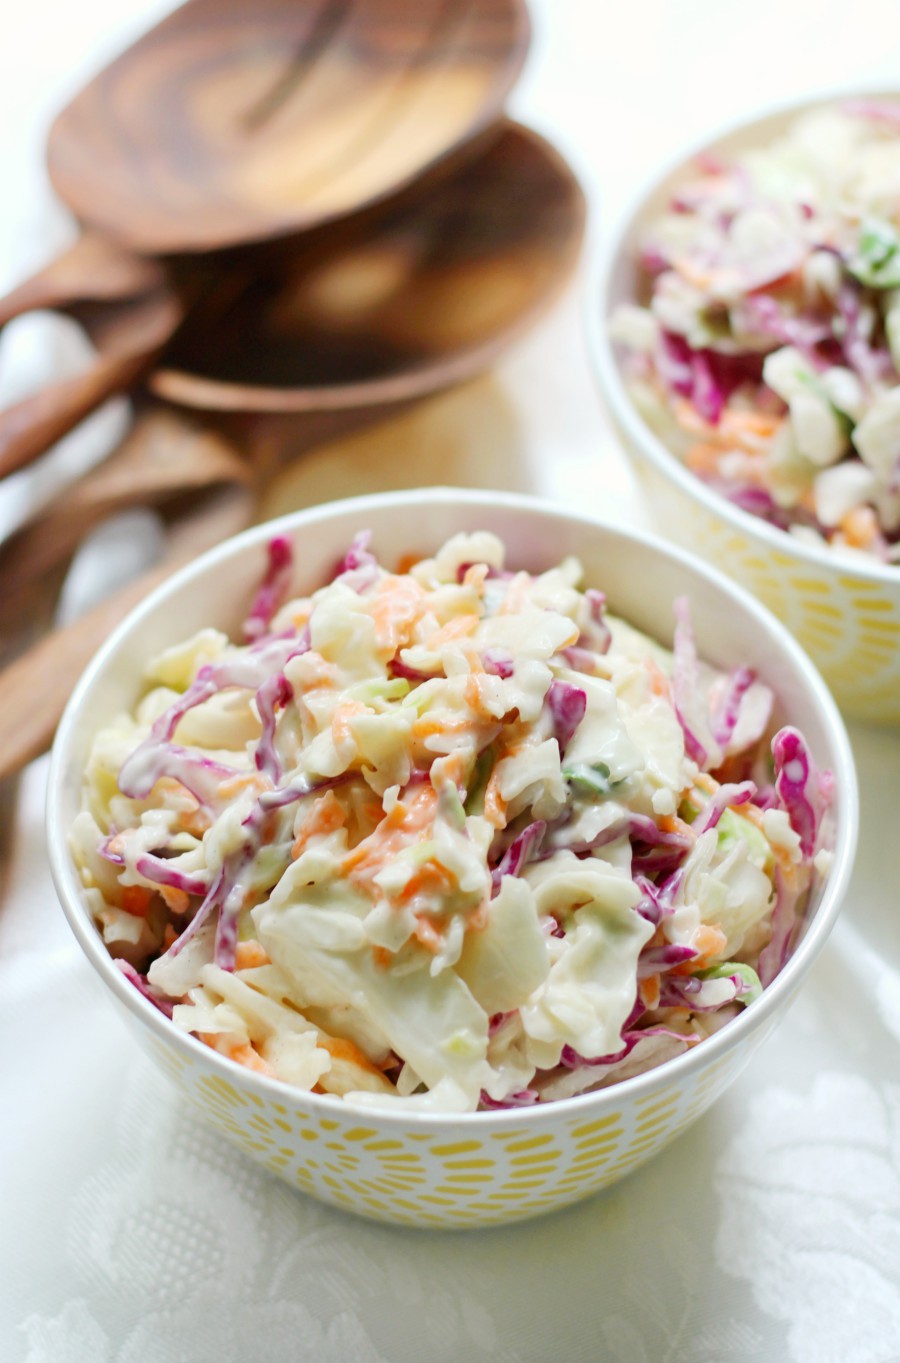 coleslaw-spoon-two-bowls-table